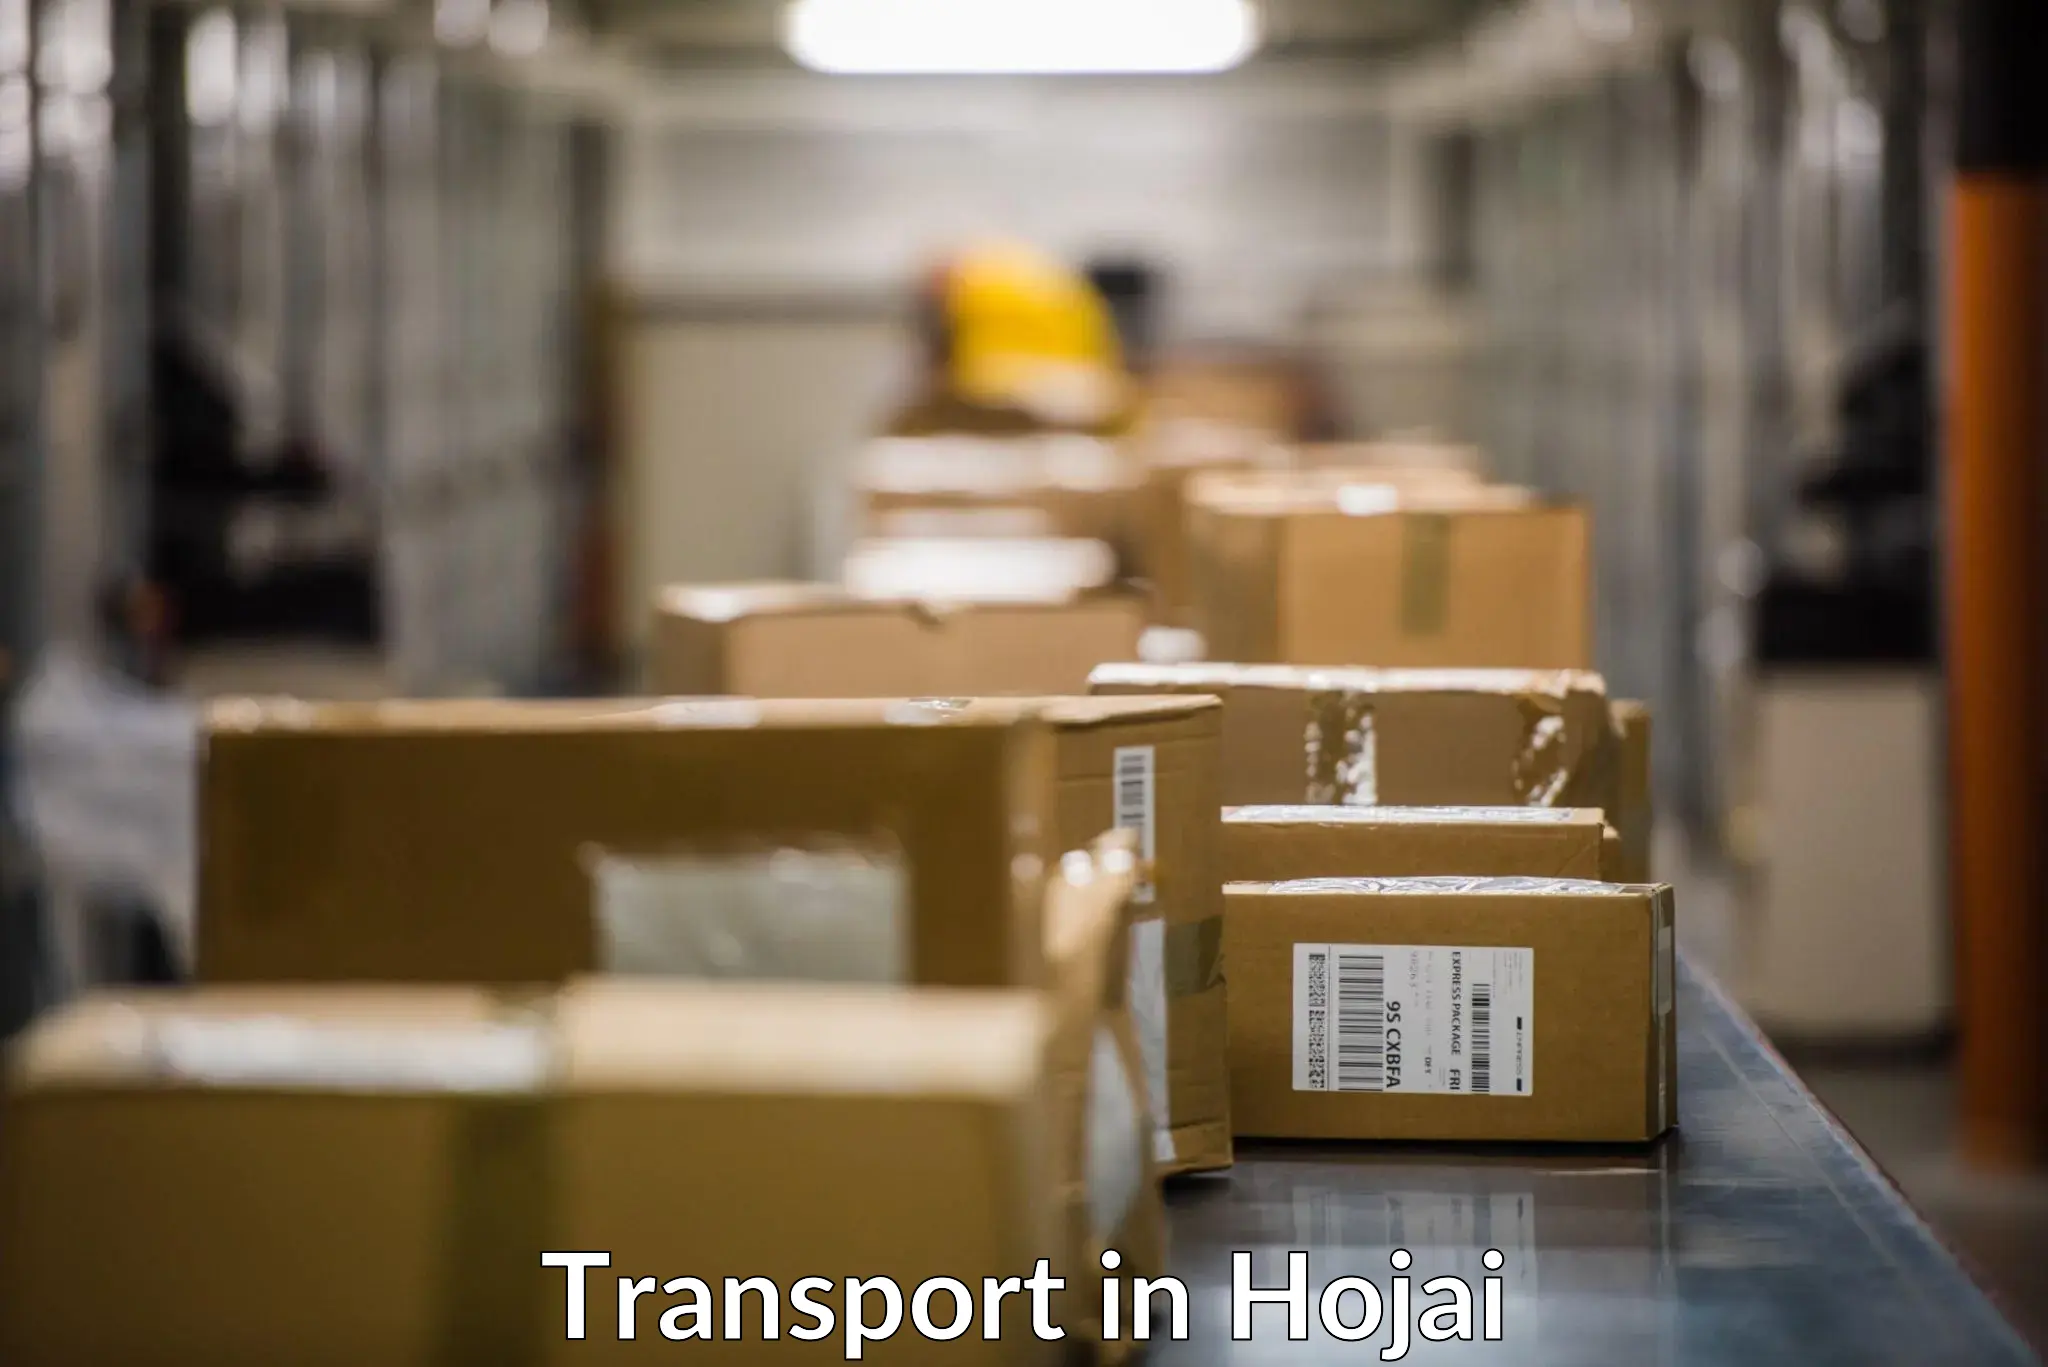 Express transport services in Hojai